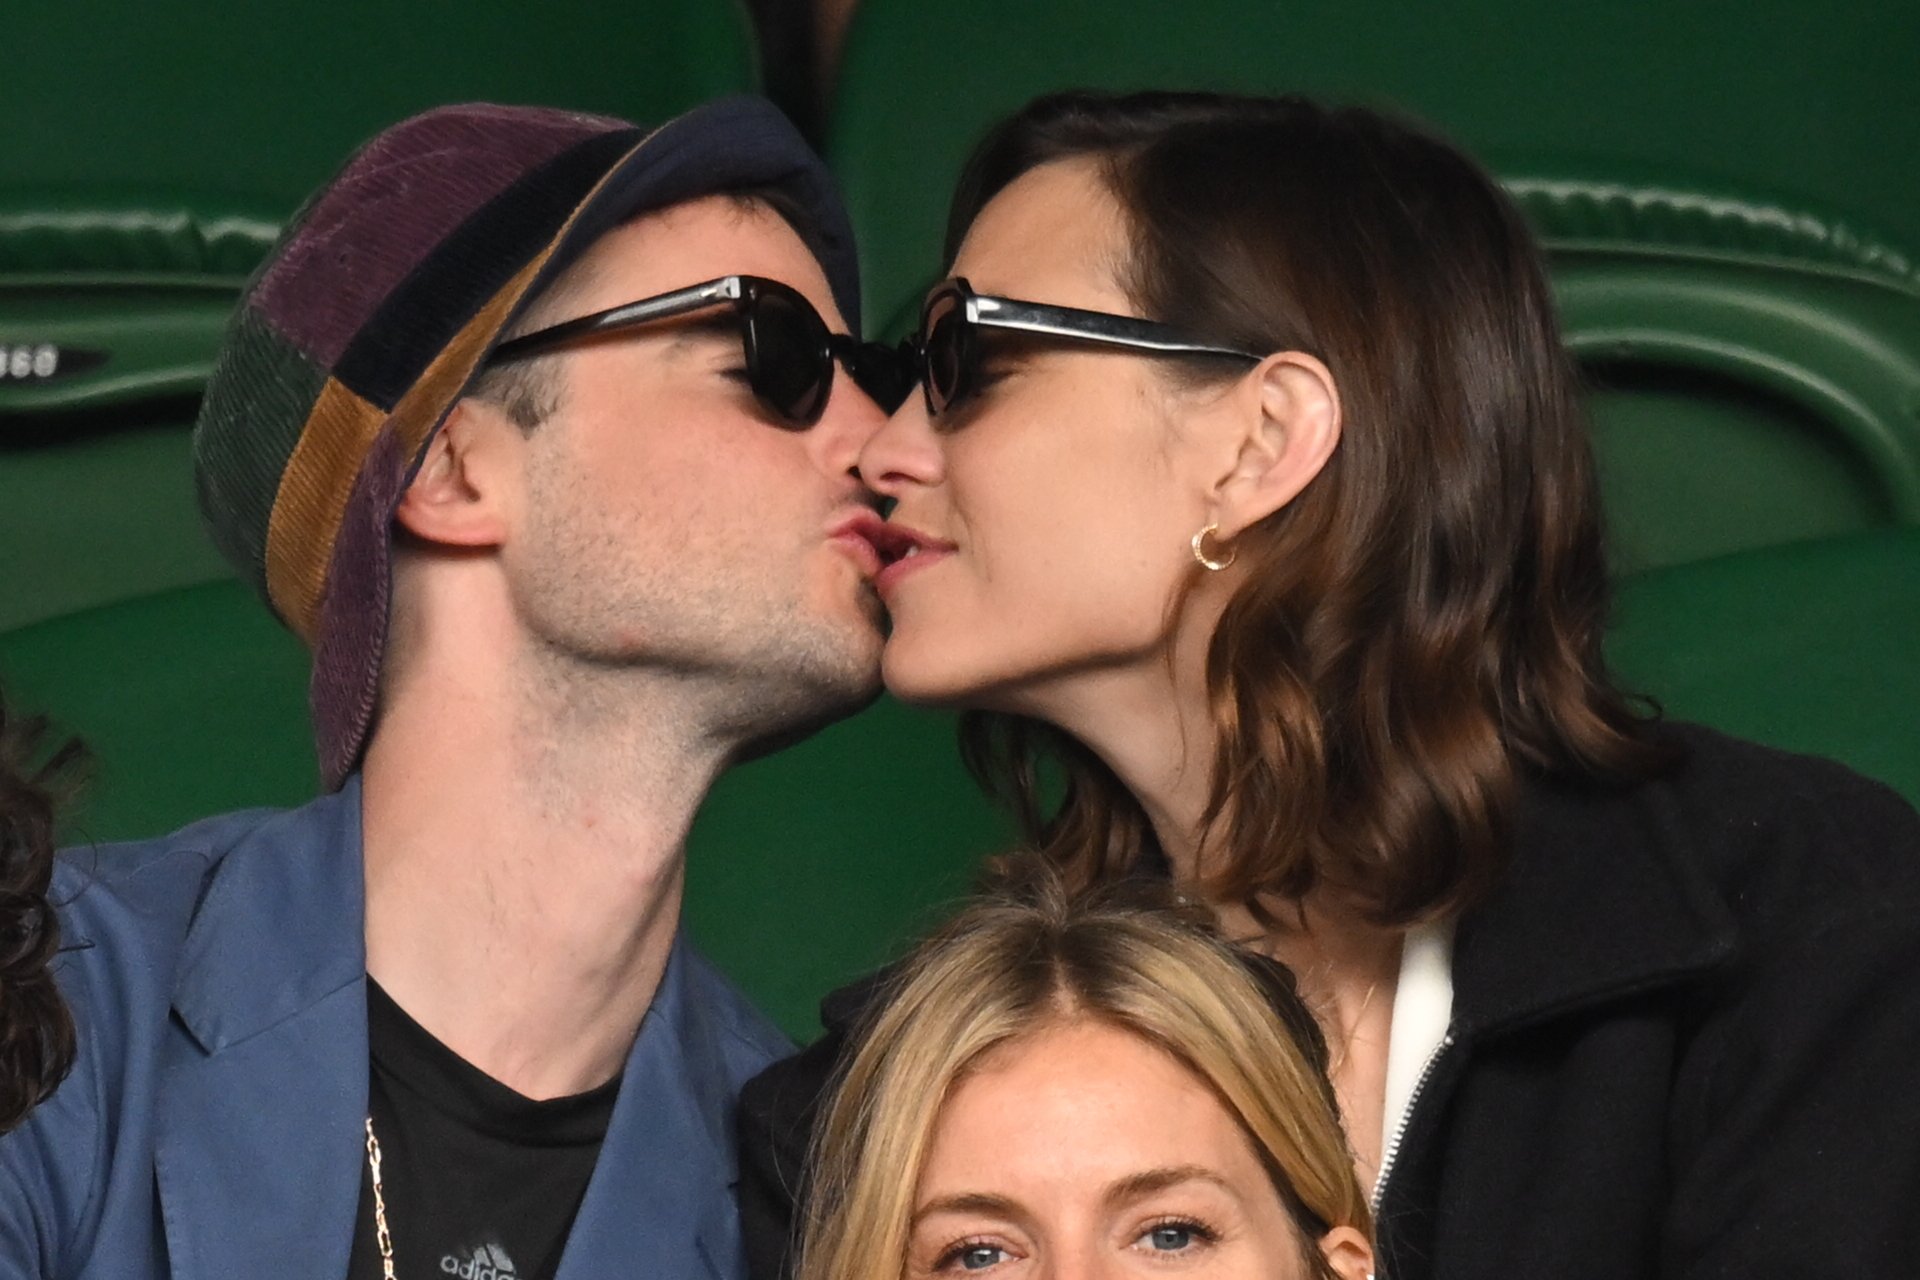 Tom Sturridge and Alexa Chung share a kiss while attending Wimbledon on July 3, 2022, in London, England. | Source: Getty Images